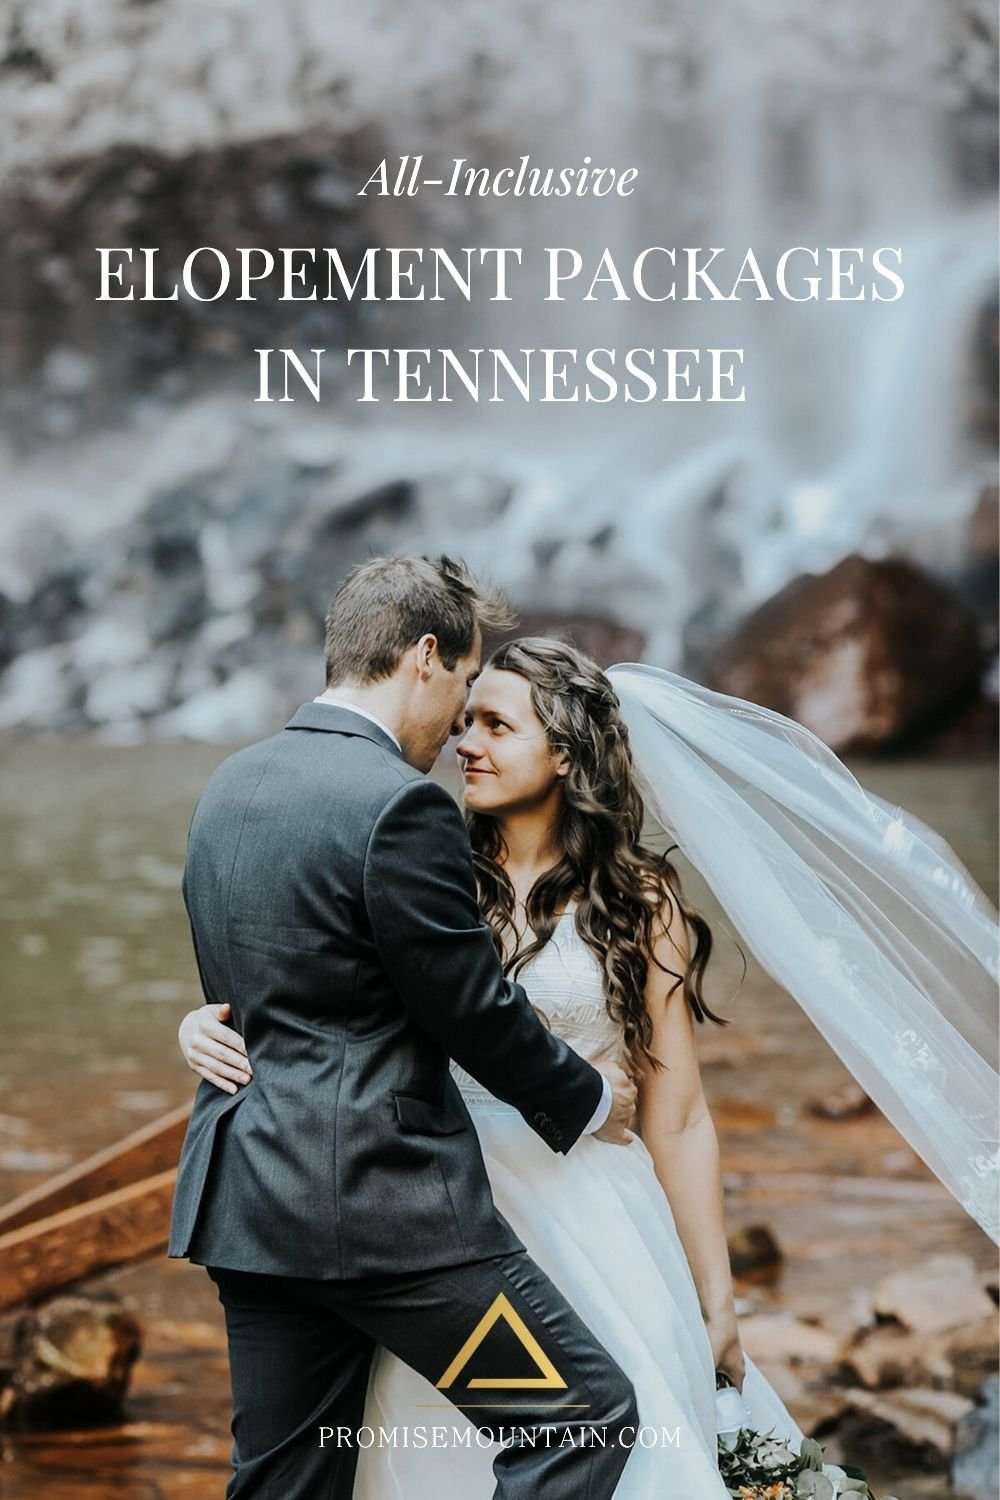 Newlywed couple looking at each other endearingly as they pose in front of a waterfall; image overlaid with text that reads All-Inclusive Elopement Packages in Tennessee